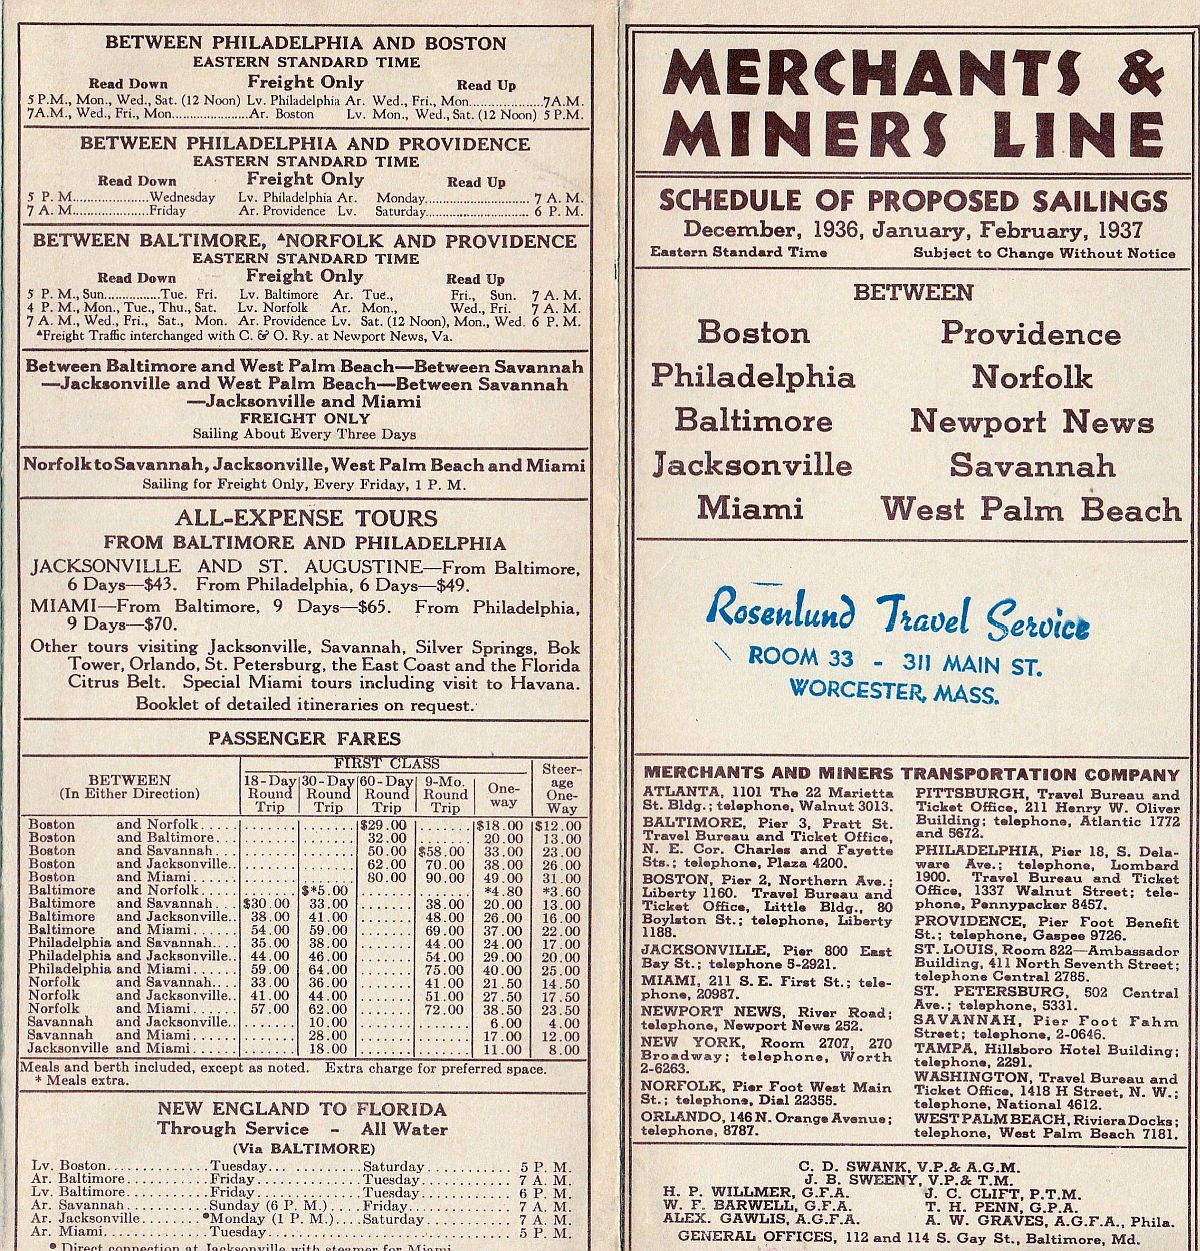 Merchants and Miners Line Schedule of Sailings cover: December to February sailings, 1937 /offices and agencies / all-expense tours & passenger fares